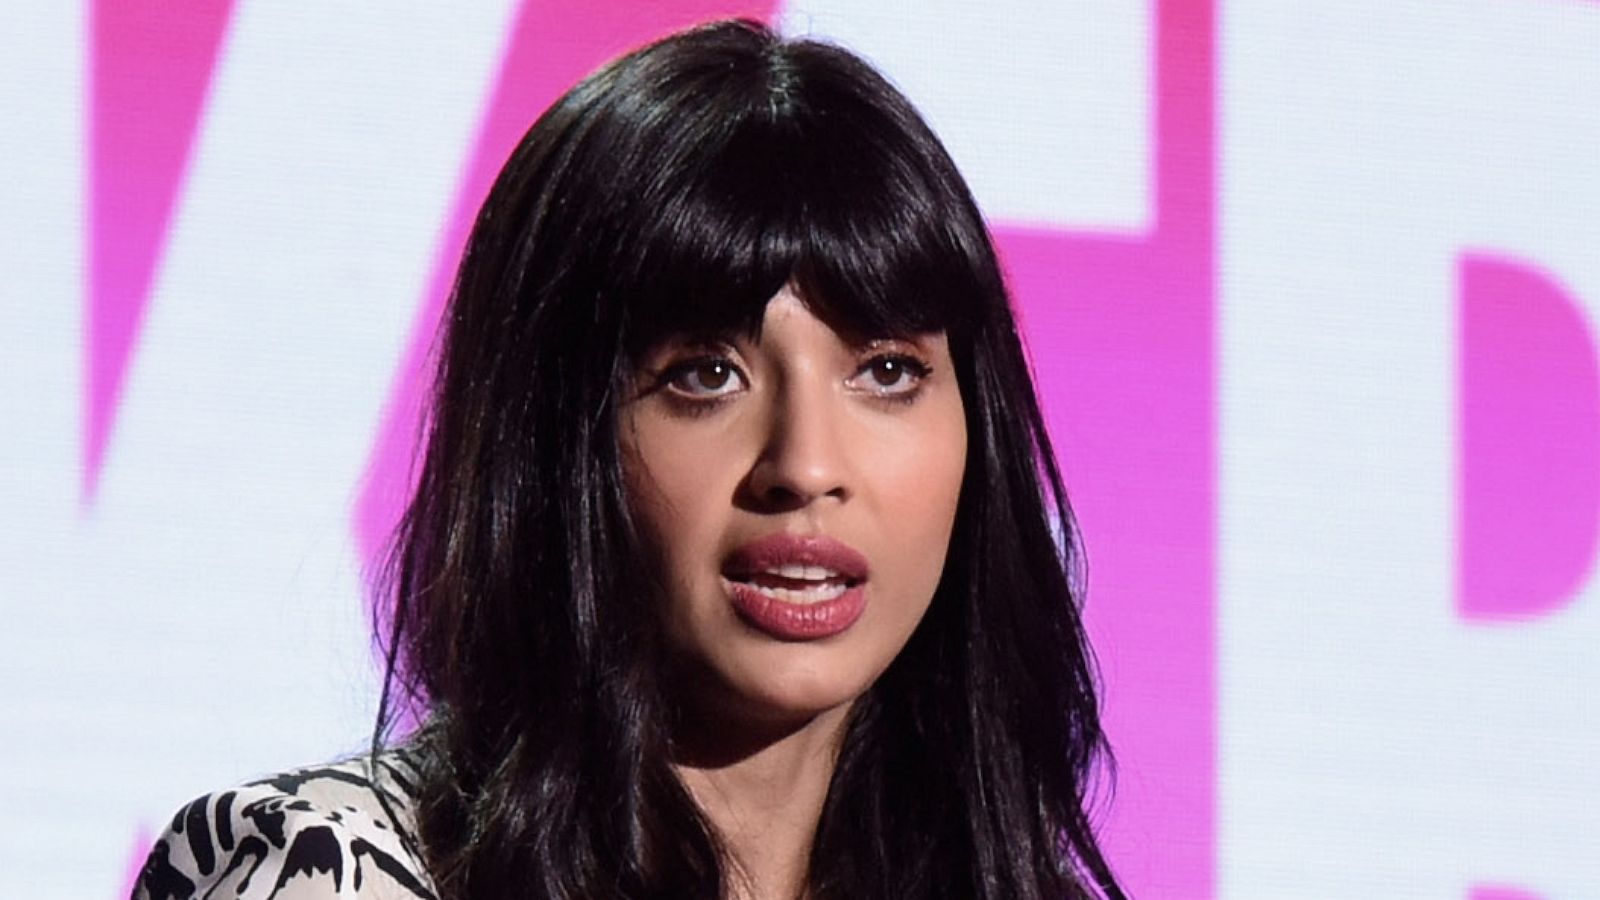 PHOTO: Jameela Jamil speaks at the 2019 MAKERS Conference, Feb. 7, 2019 in Dana Point, Calif.